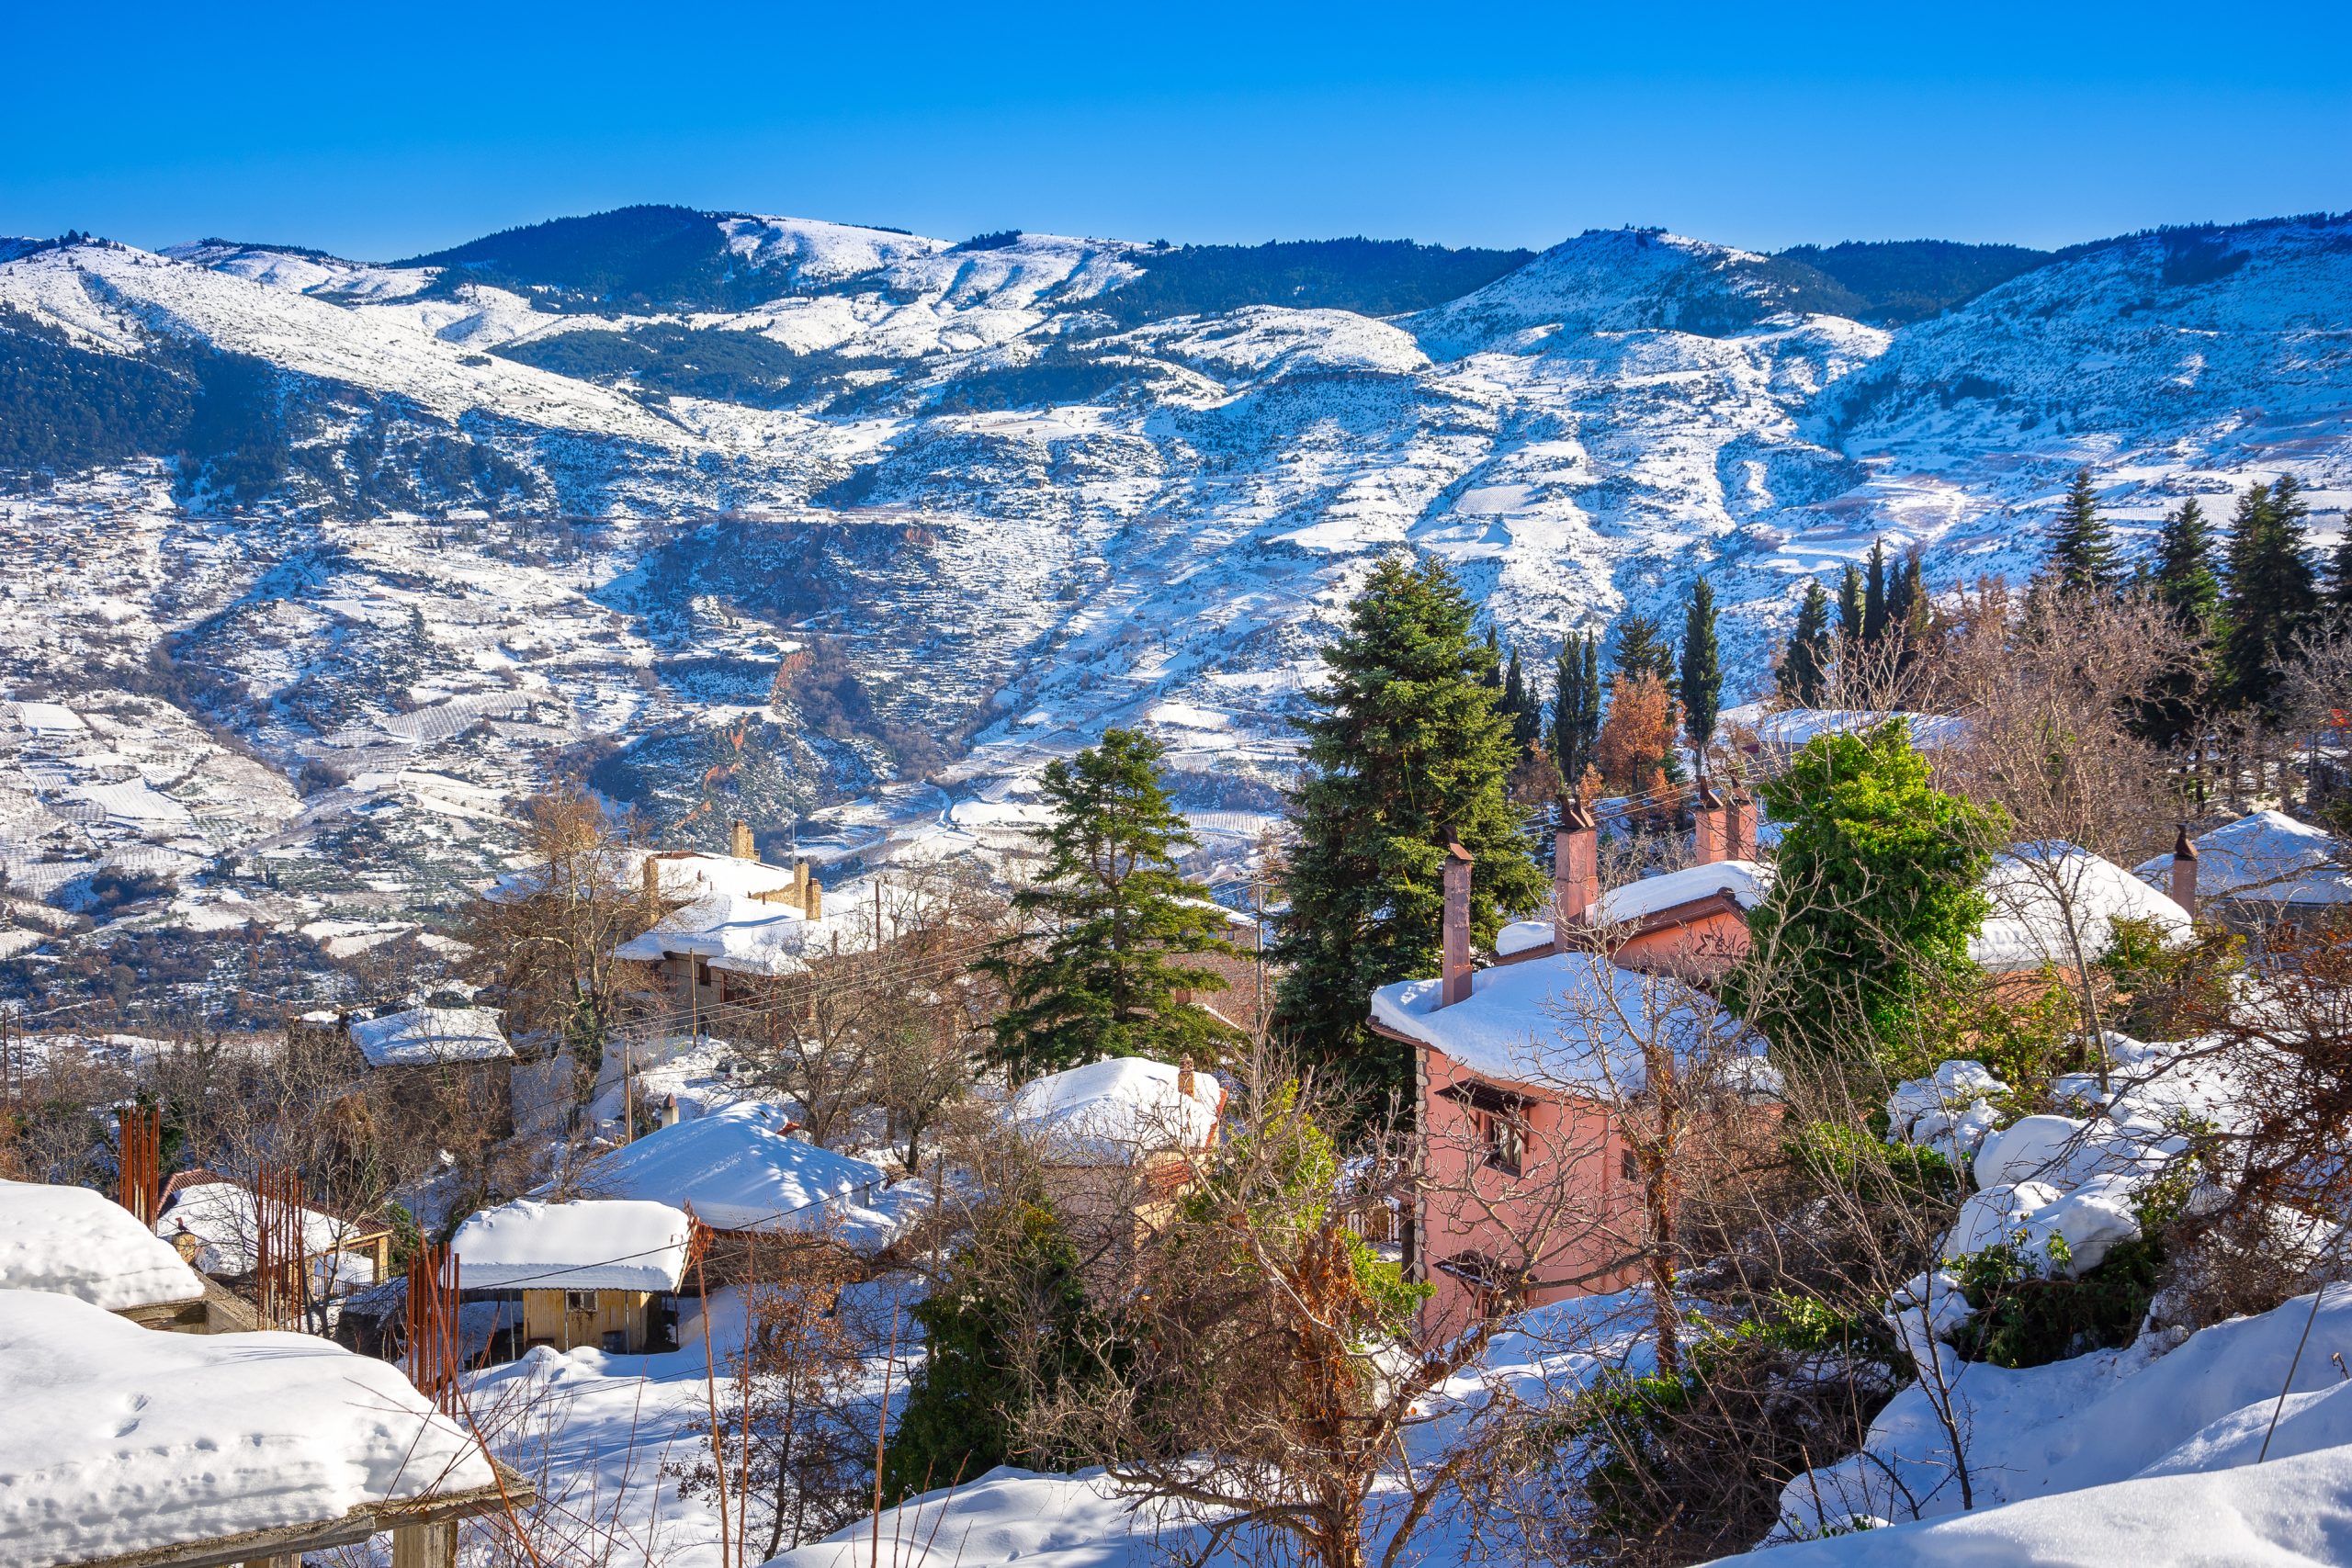 Winter landscape with snow, wooden houses and clear blue sky, Trikala Korinthias, Greece.